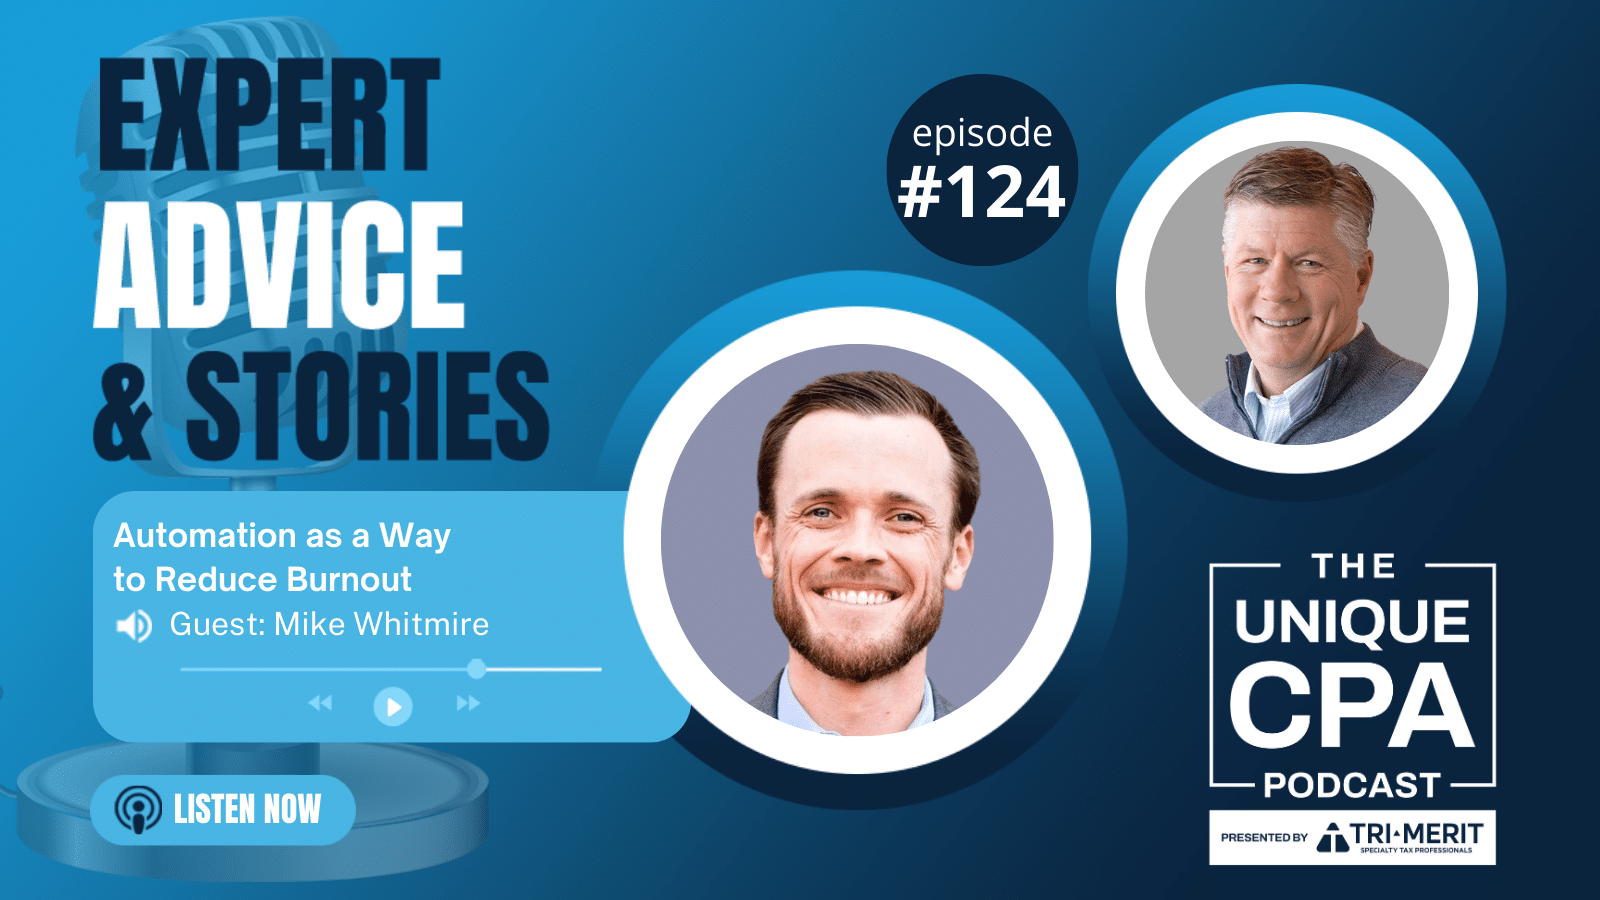 Unique Cpa Featured Image Ep 124 Mike Whitmire - Automation As A Way To Reduce Burnout - Tri-Merit